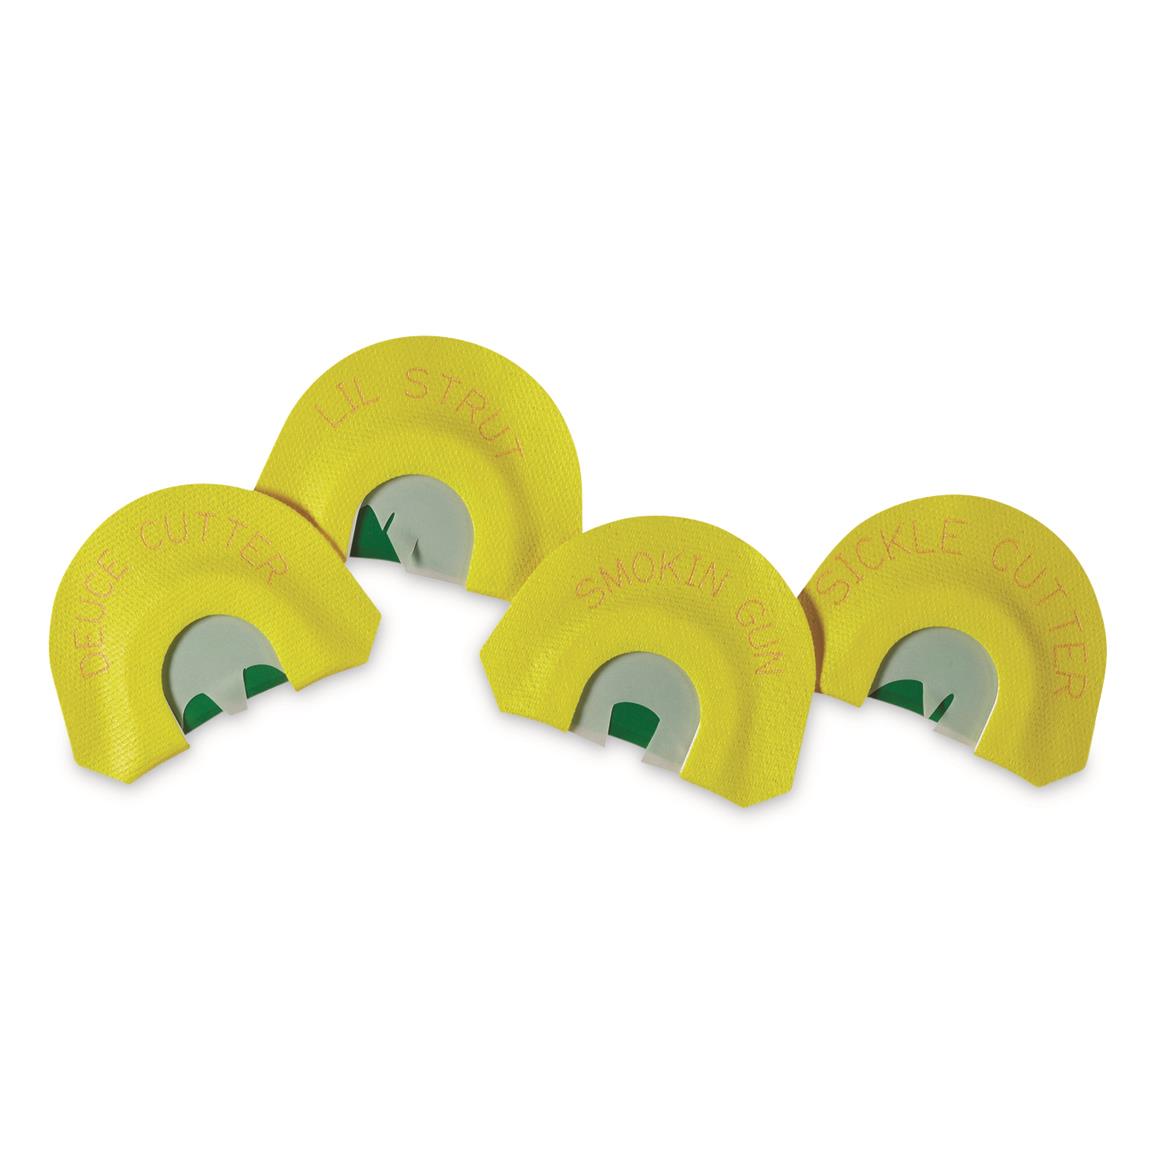 HS Strut Fearsome 4 Turkey Mouth Call Set, 4 Pieces